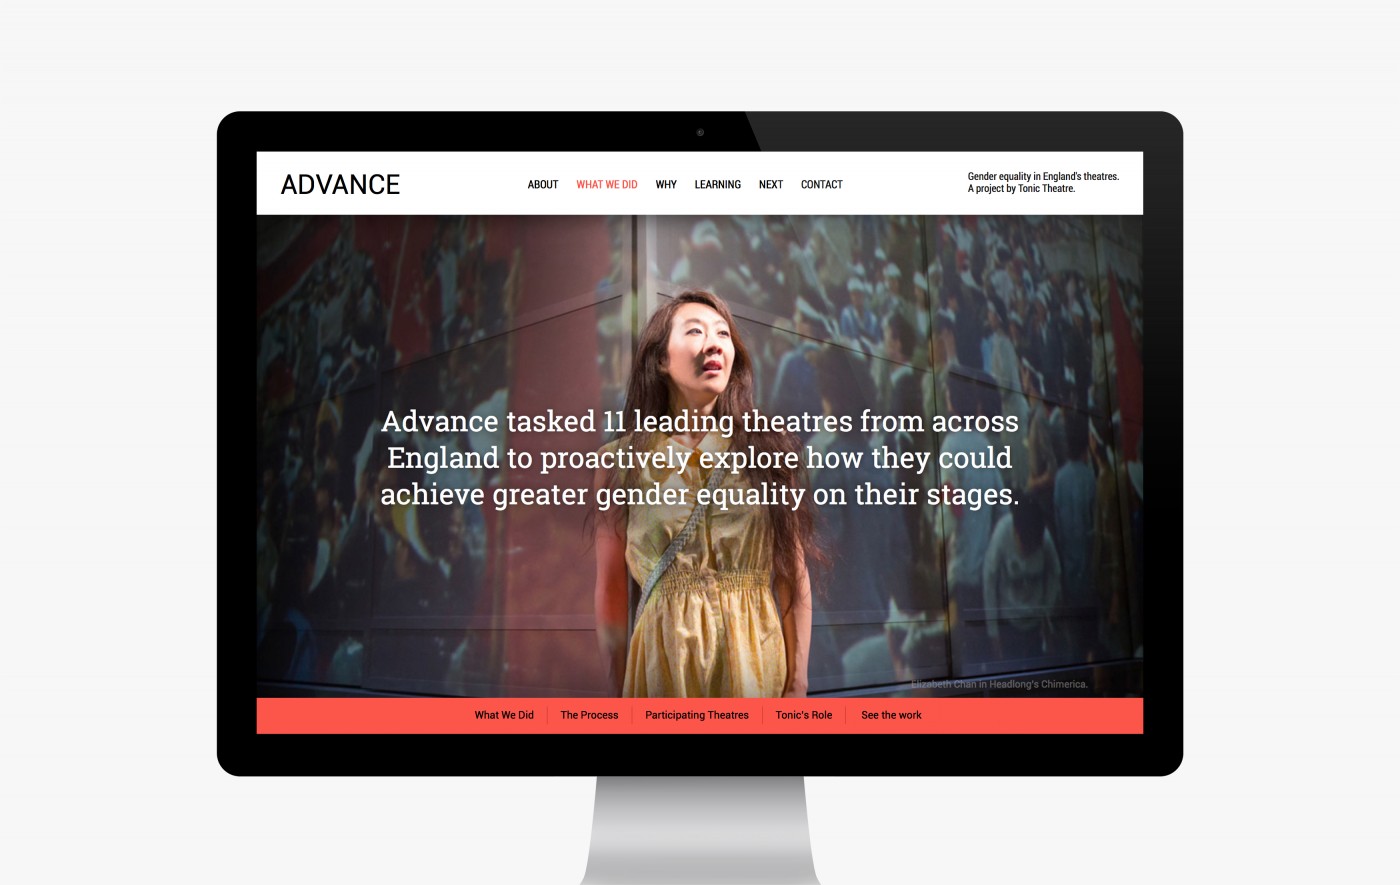 Advance website - a project by Tonic Theatre looking at gender equality in English theatre